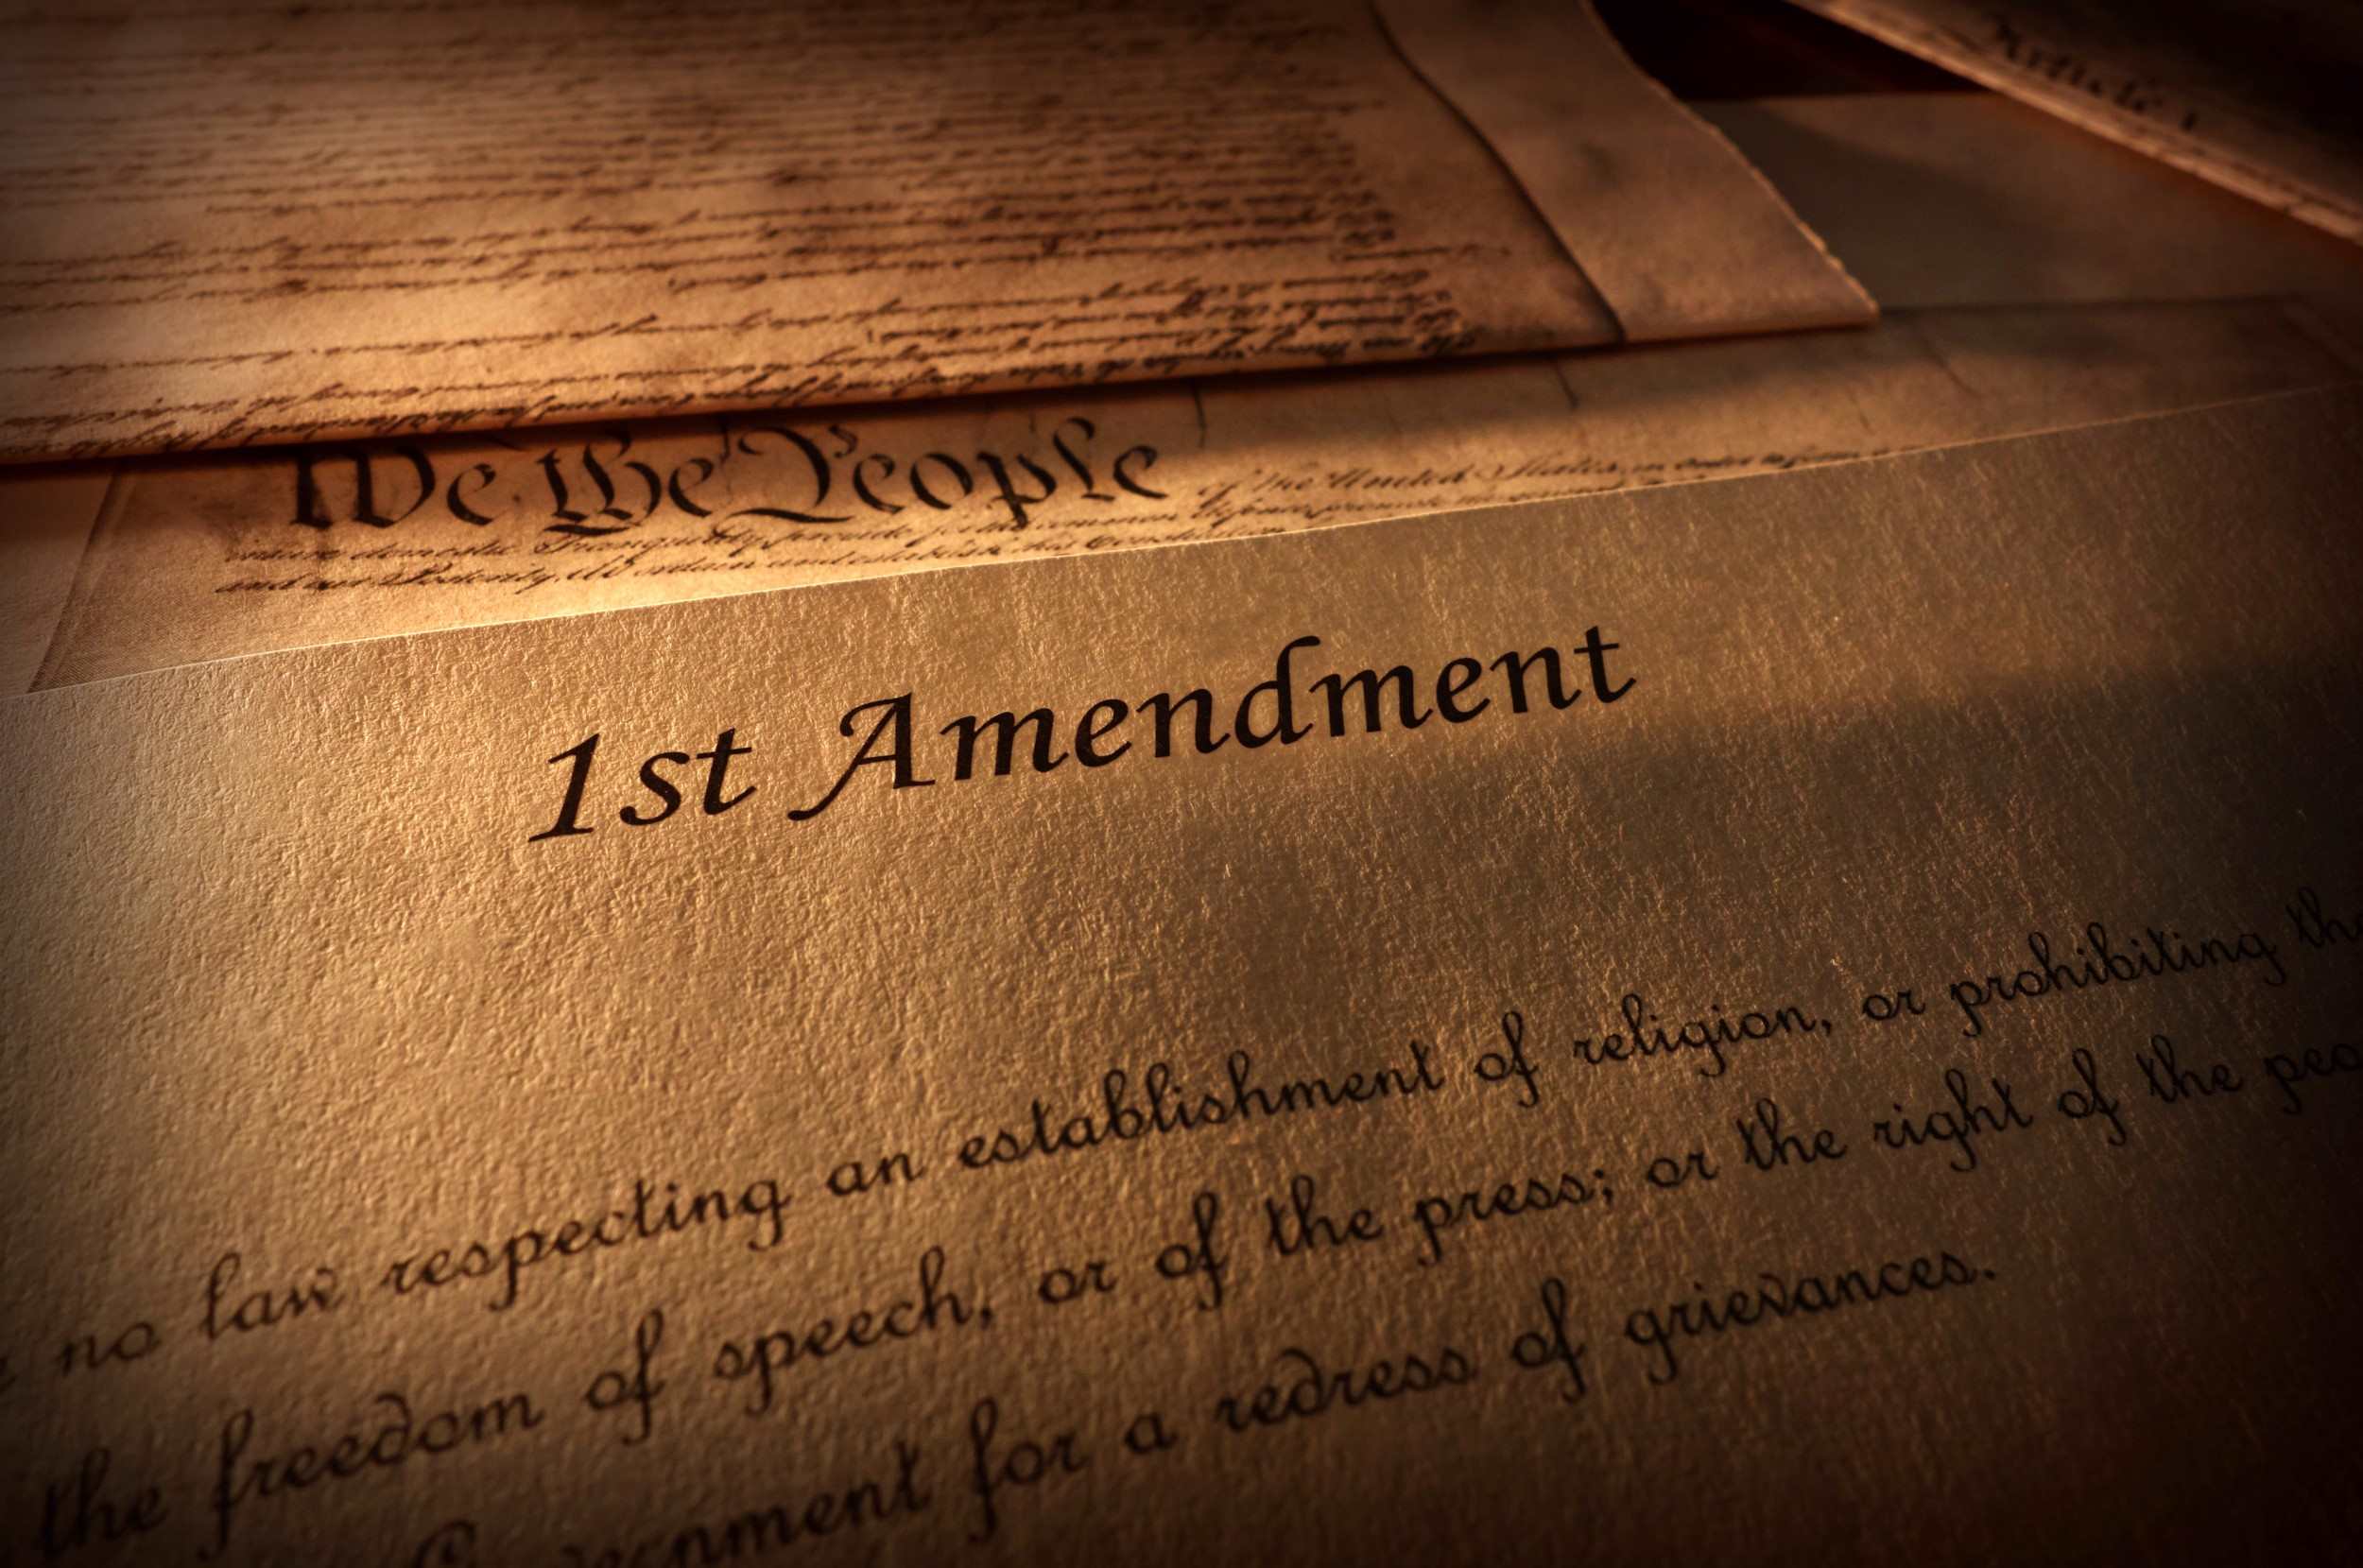 How Does The First Amendment Separate Church And State?